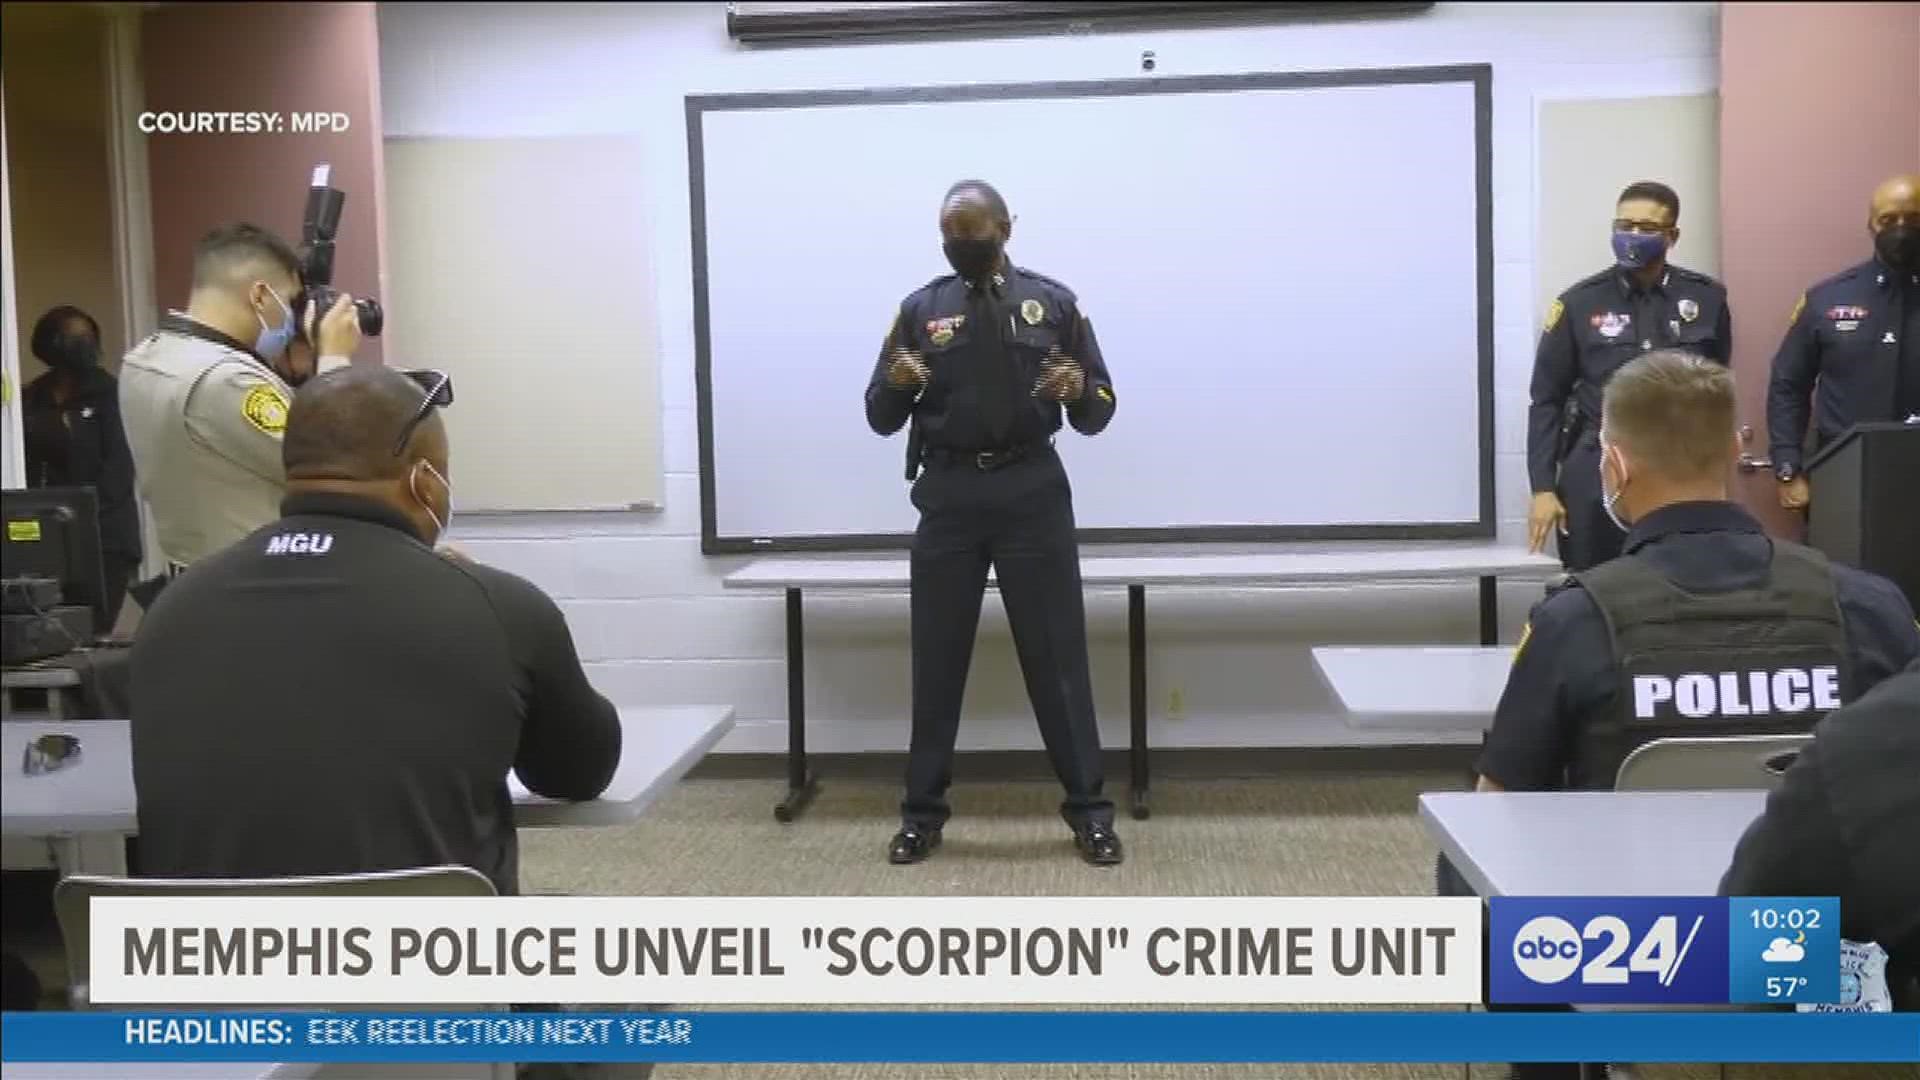 MPD's SCORPION Unit will target high crime hot spots.